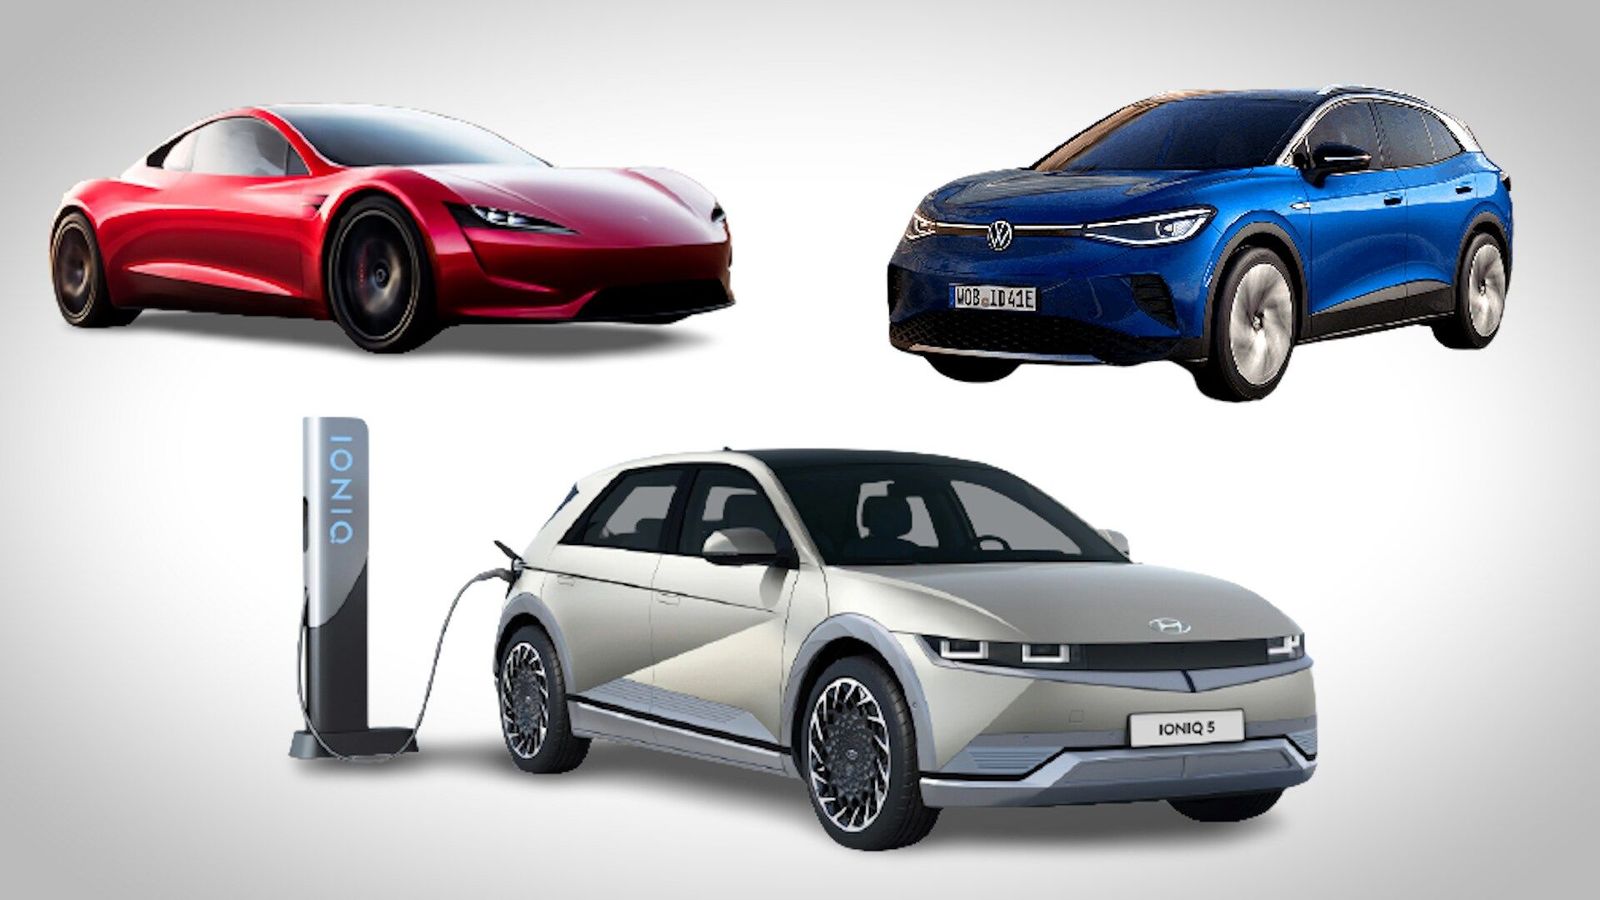 the latest electric cars on the world - Overview of the latest electric cars in the world